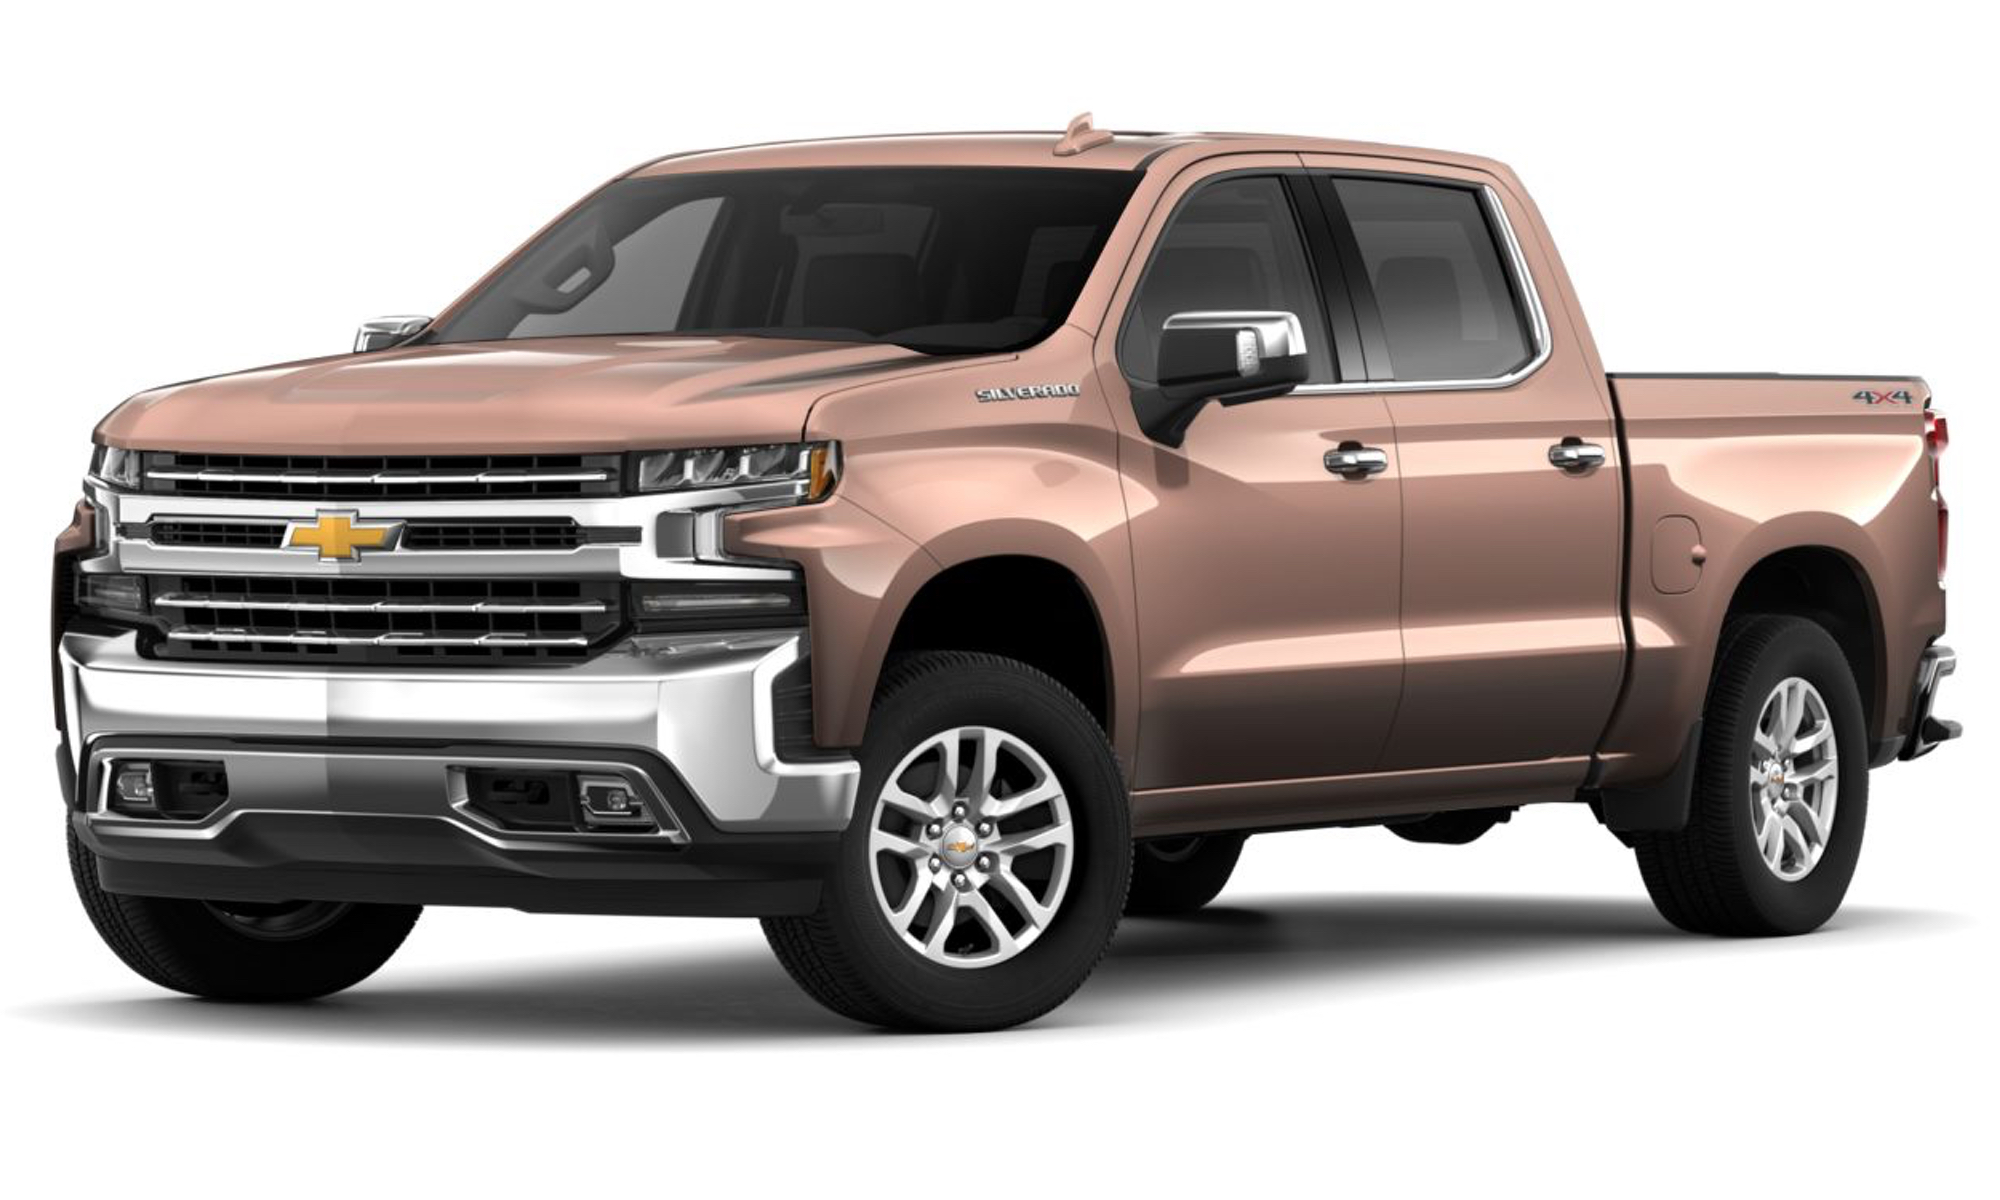 New Chevy Silverado Exterior Colors for Large Space